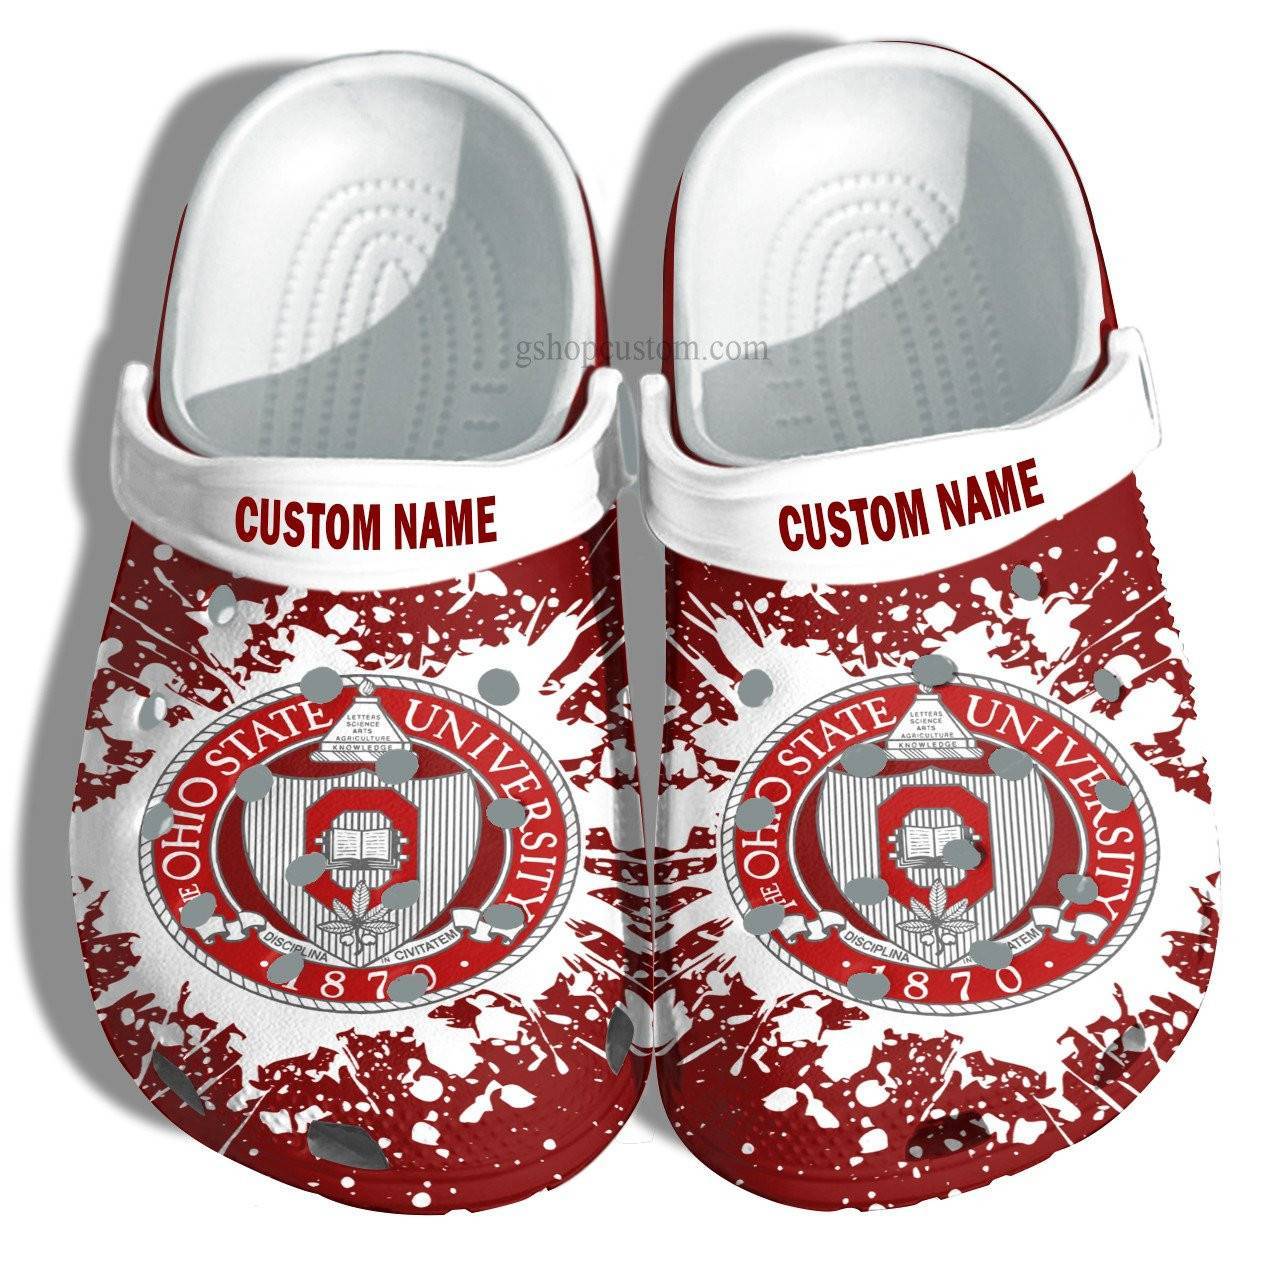 The Ohio State University Graduation Gifts Croc Shoes Customize – Admission Gift Crocss Shoes